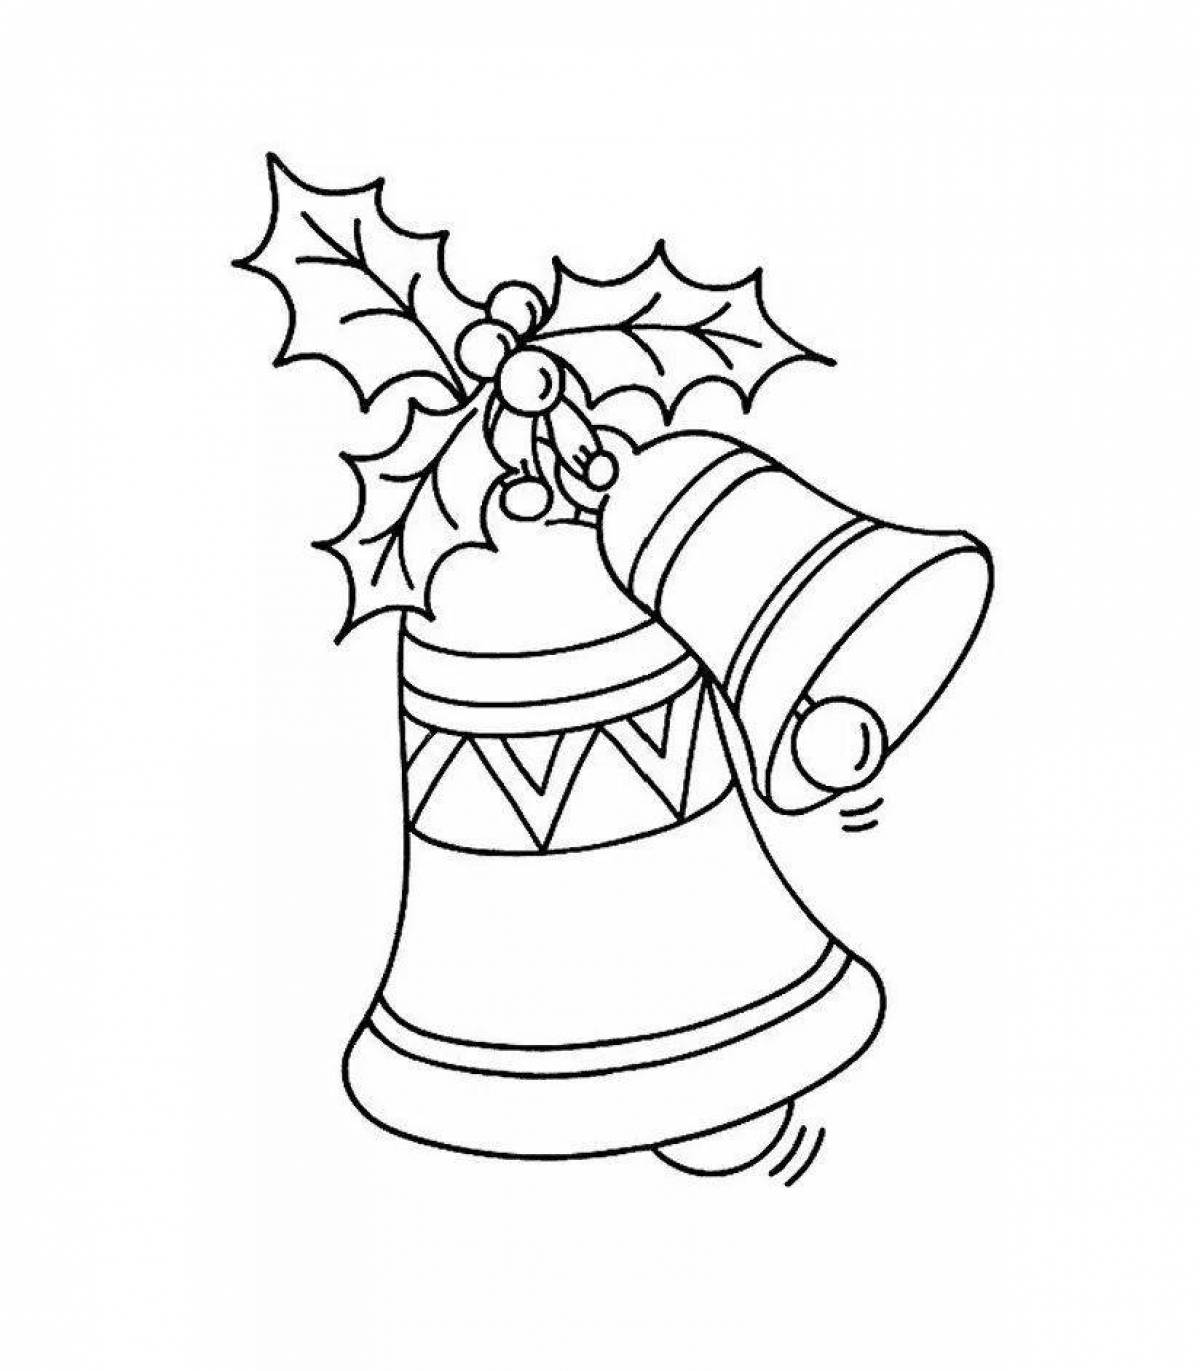 Coloring page captivating Christmas bell